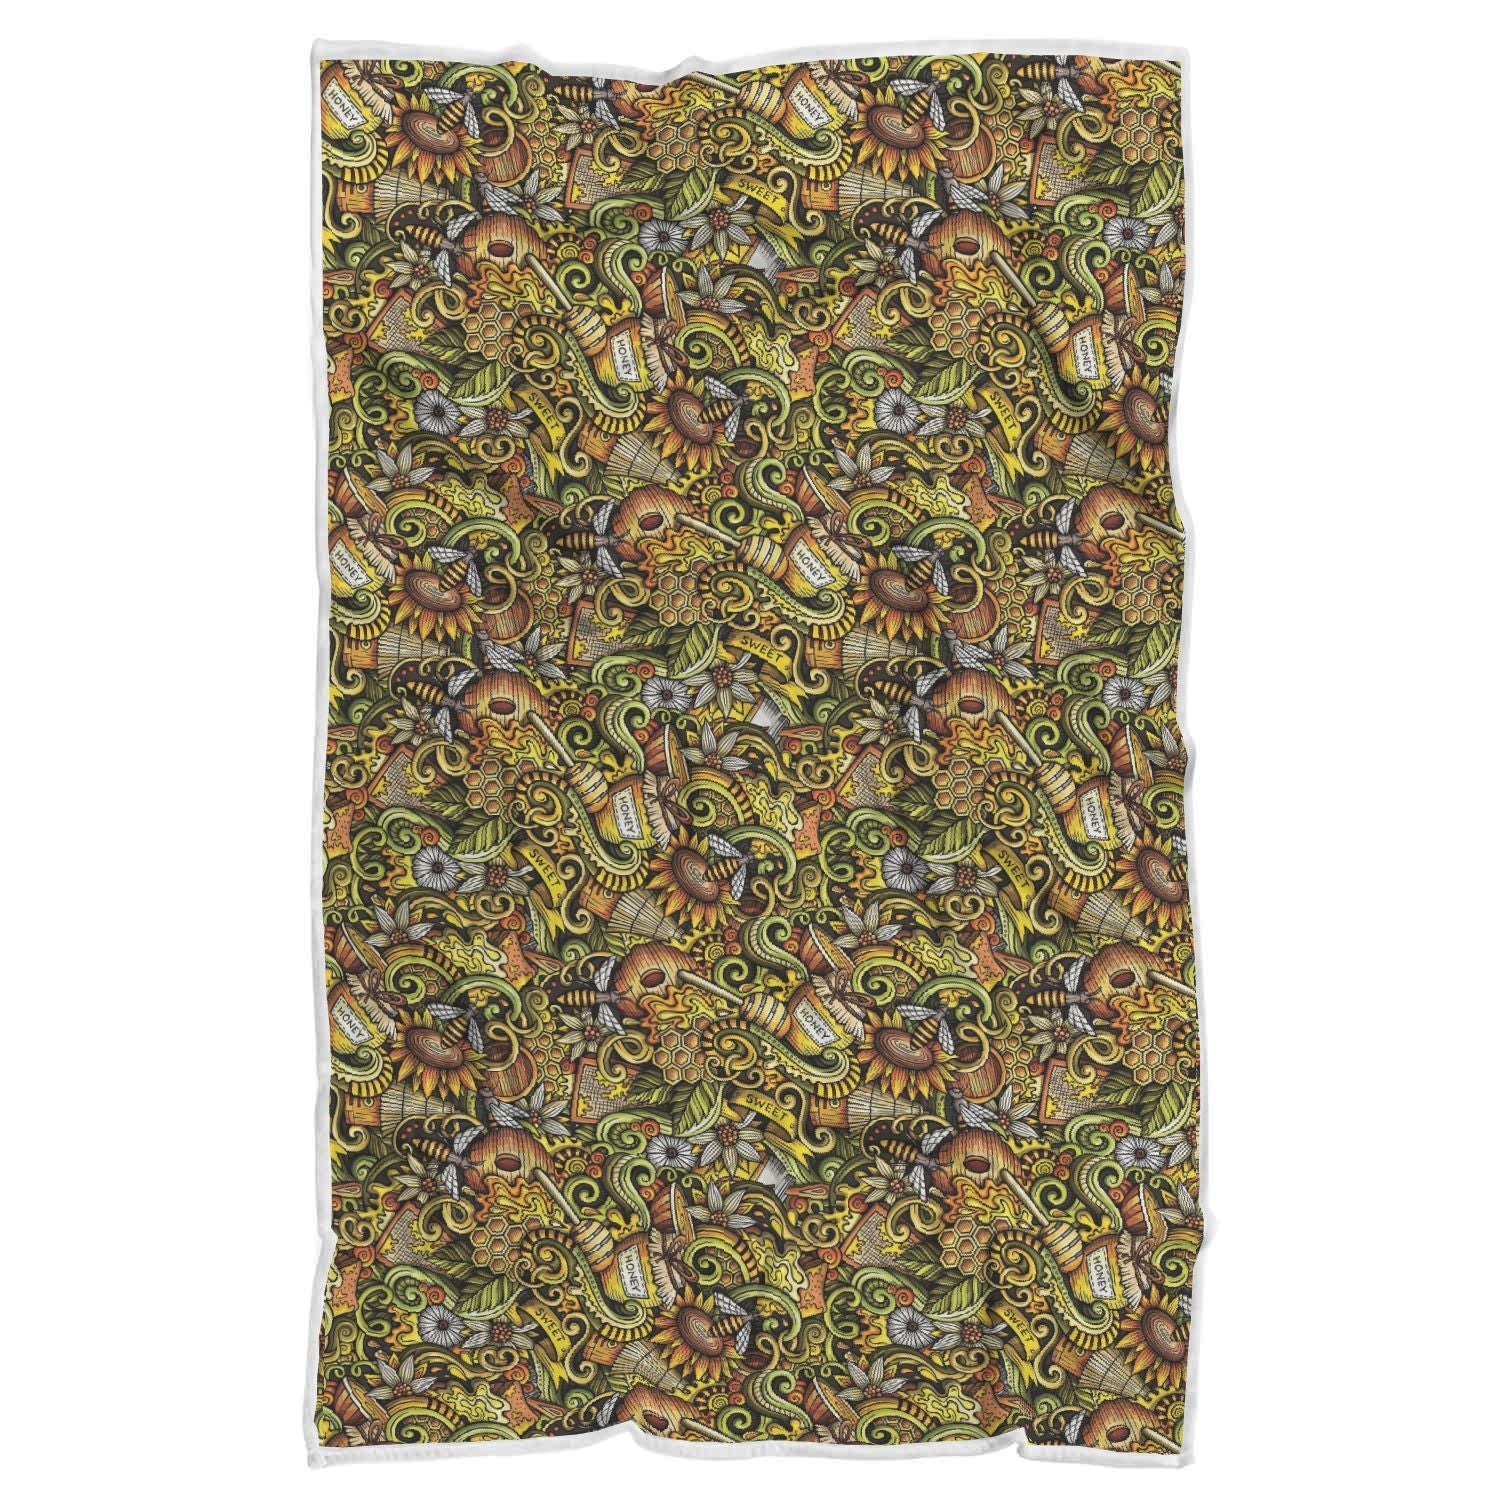 Honey Bee Psychedelic Gifts Pattern Print Throw Blanket